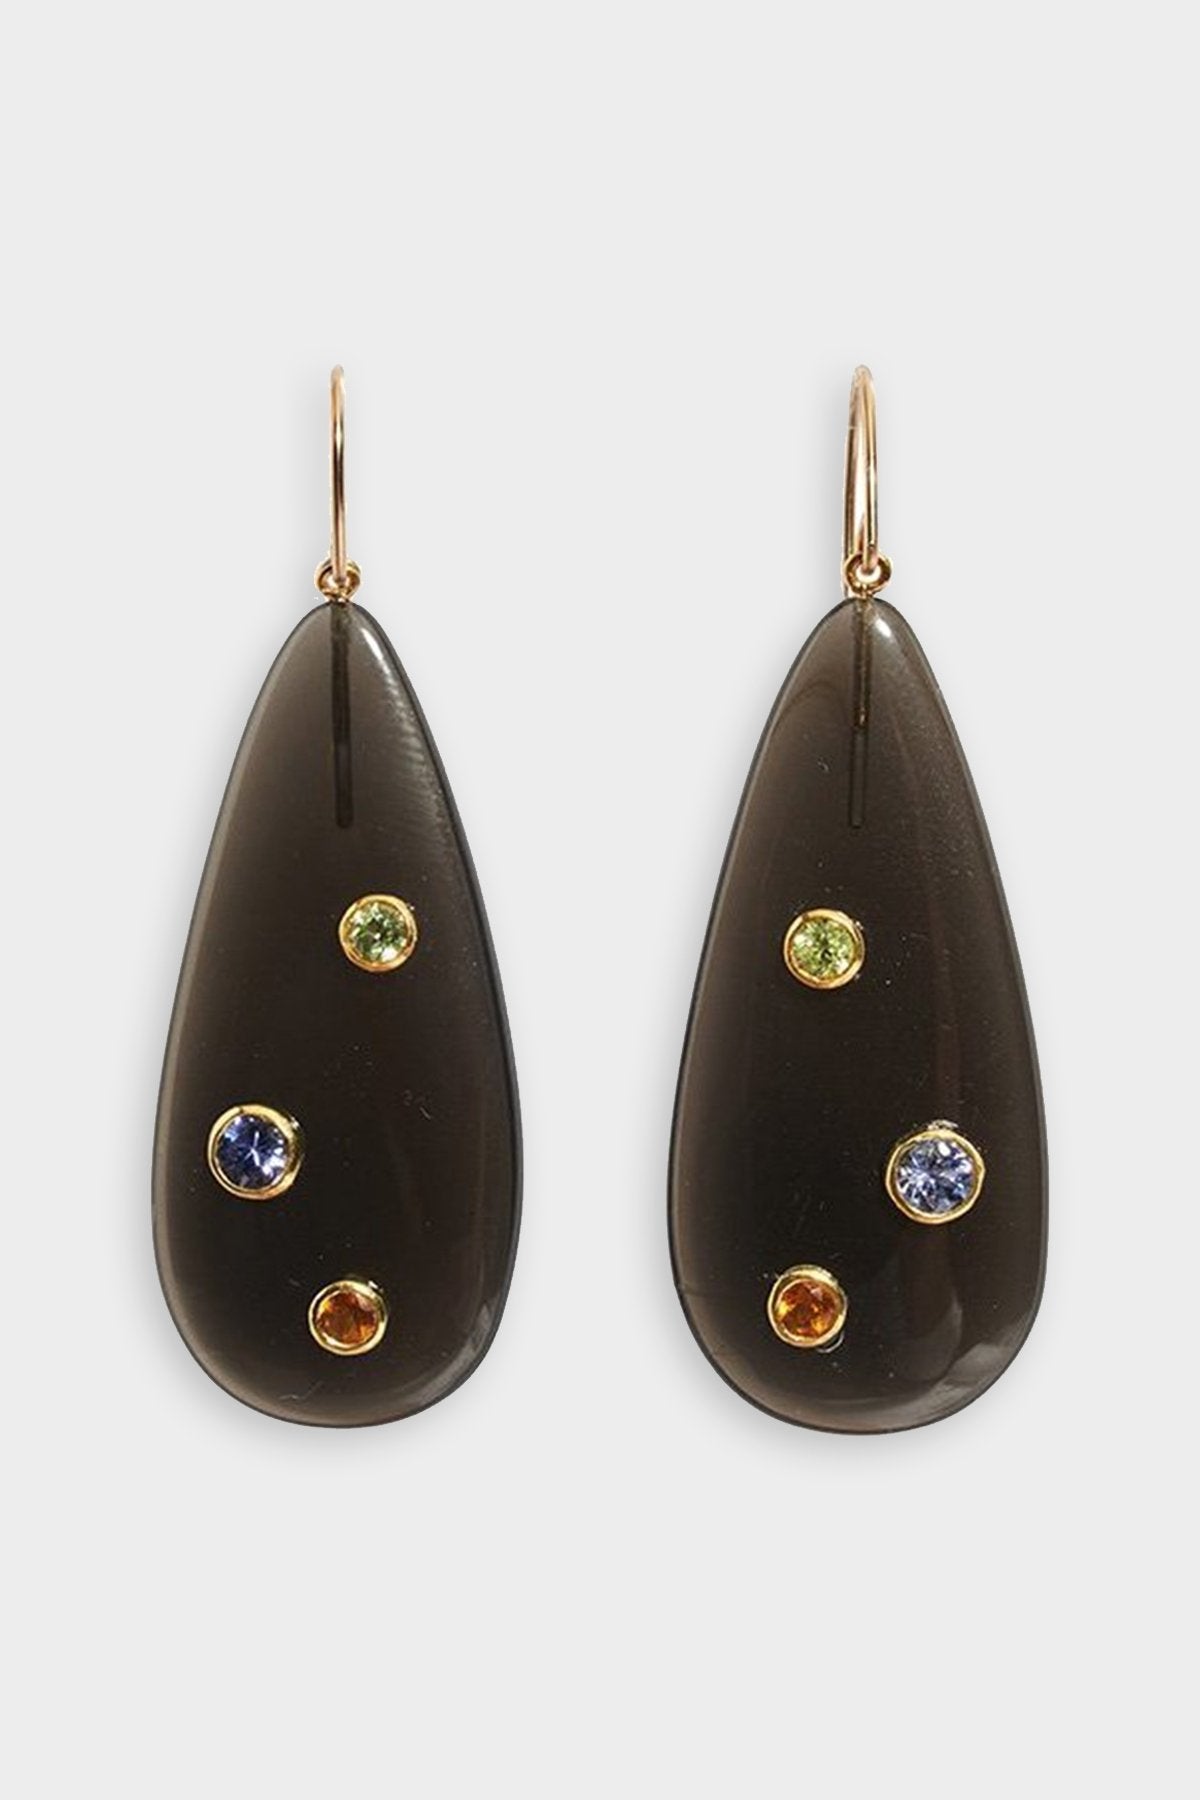 Ceremony Earrings in Onyx - shop-olivia.com